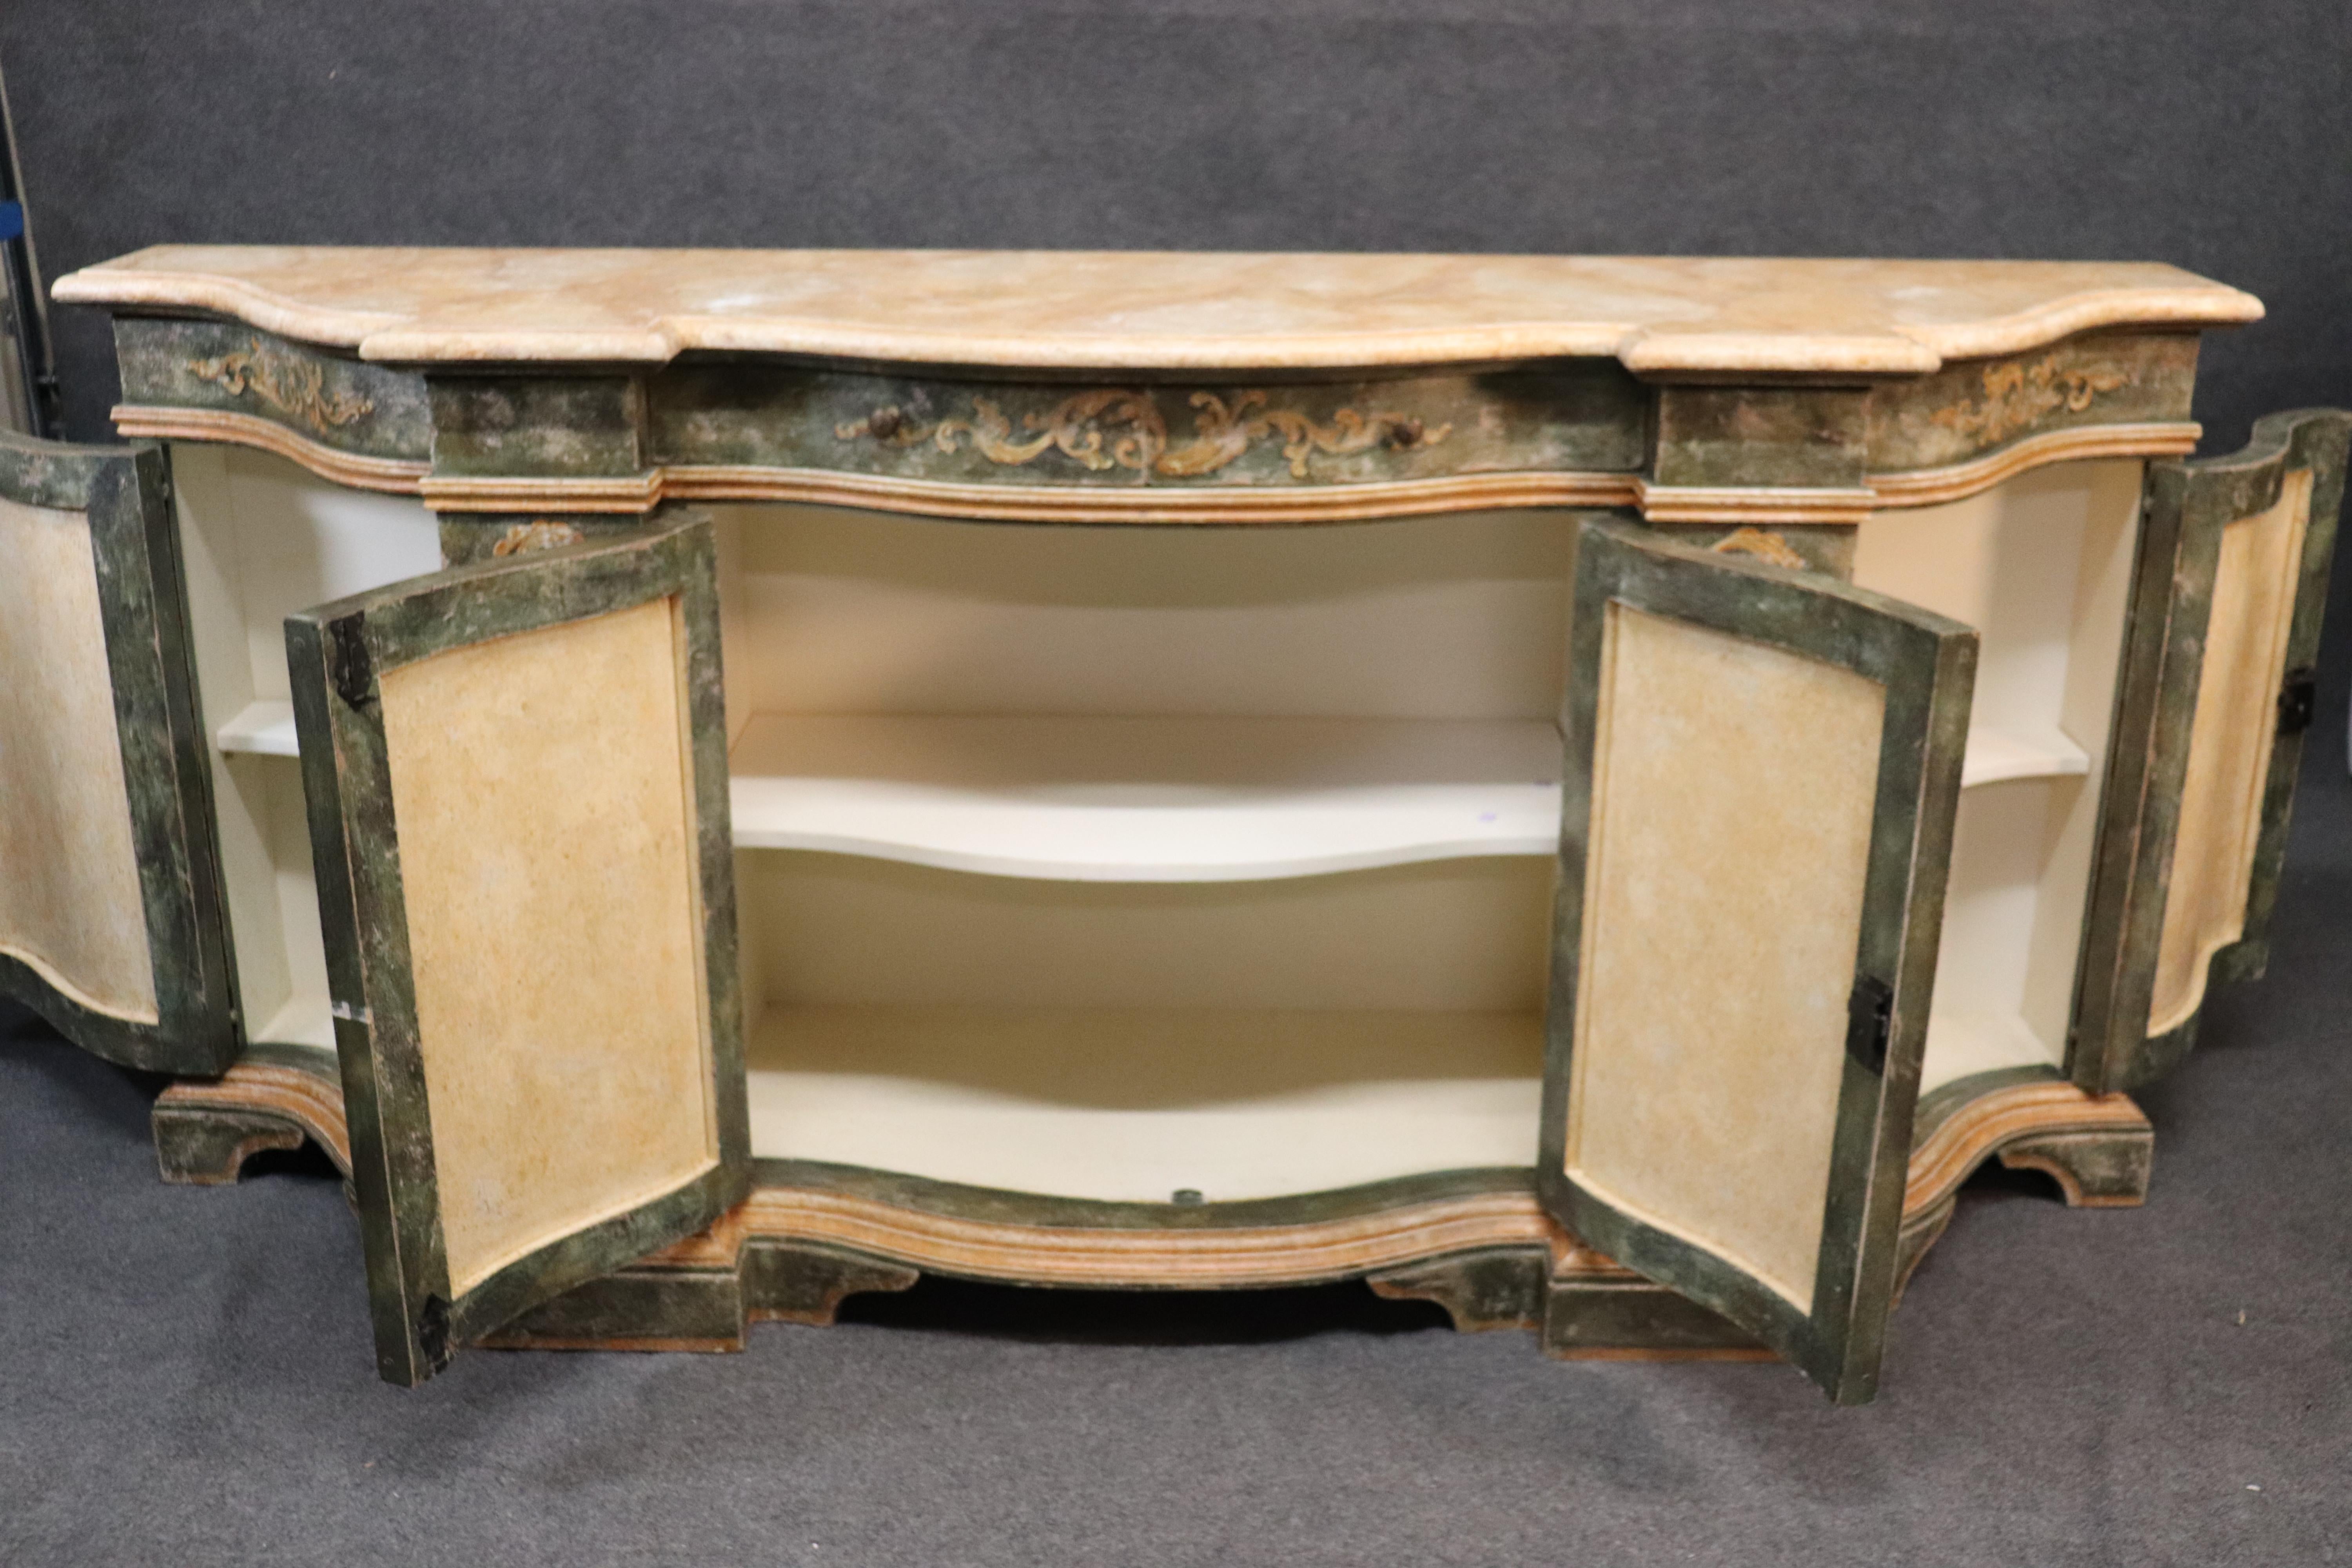 This is a fantastic custom made Italian Venetian sideboard. This was made in Italy and handmade and hand painted to replicate an authentic antique. If I didn't tell you, you'd think it was 150-200 years old, it's that well-made. The sideboard